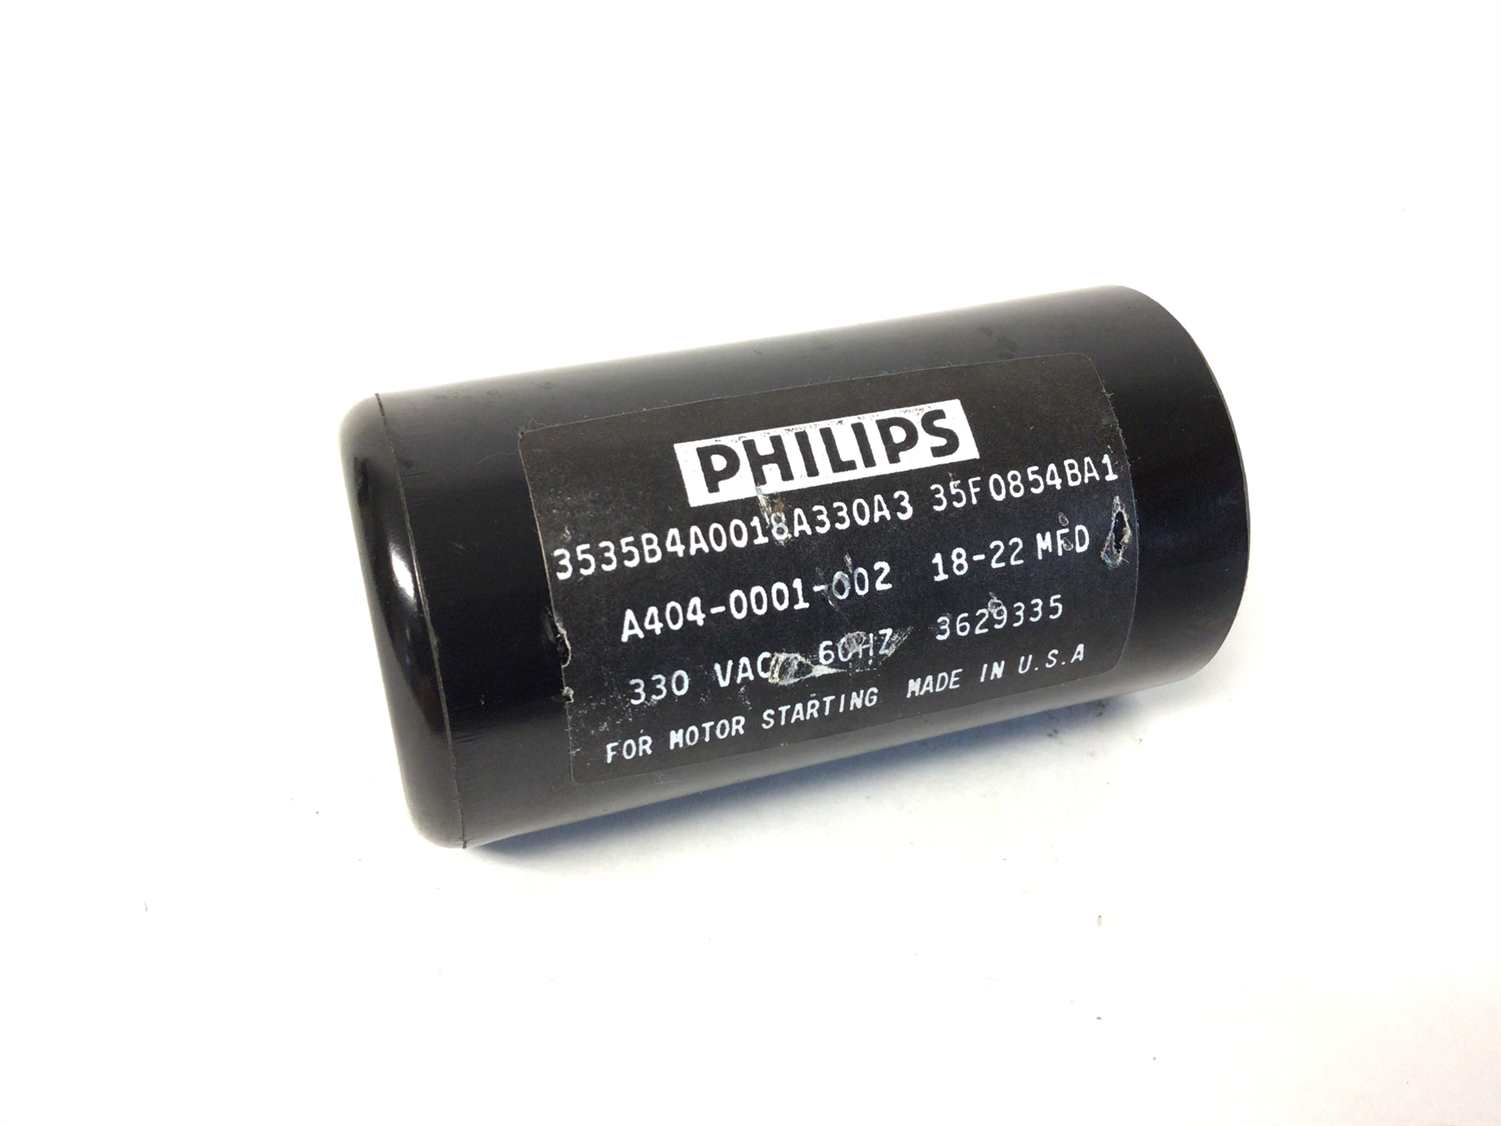 Phillips 18-22 MFD Capacitor (Used)